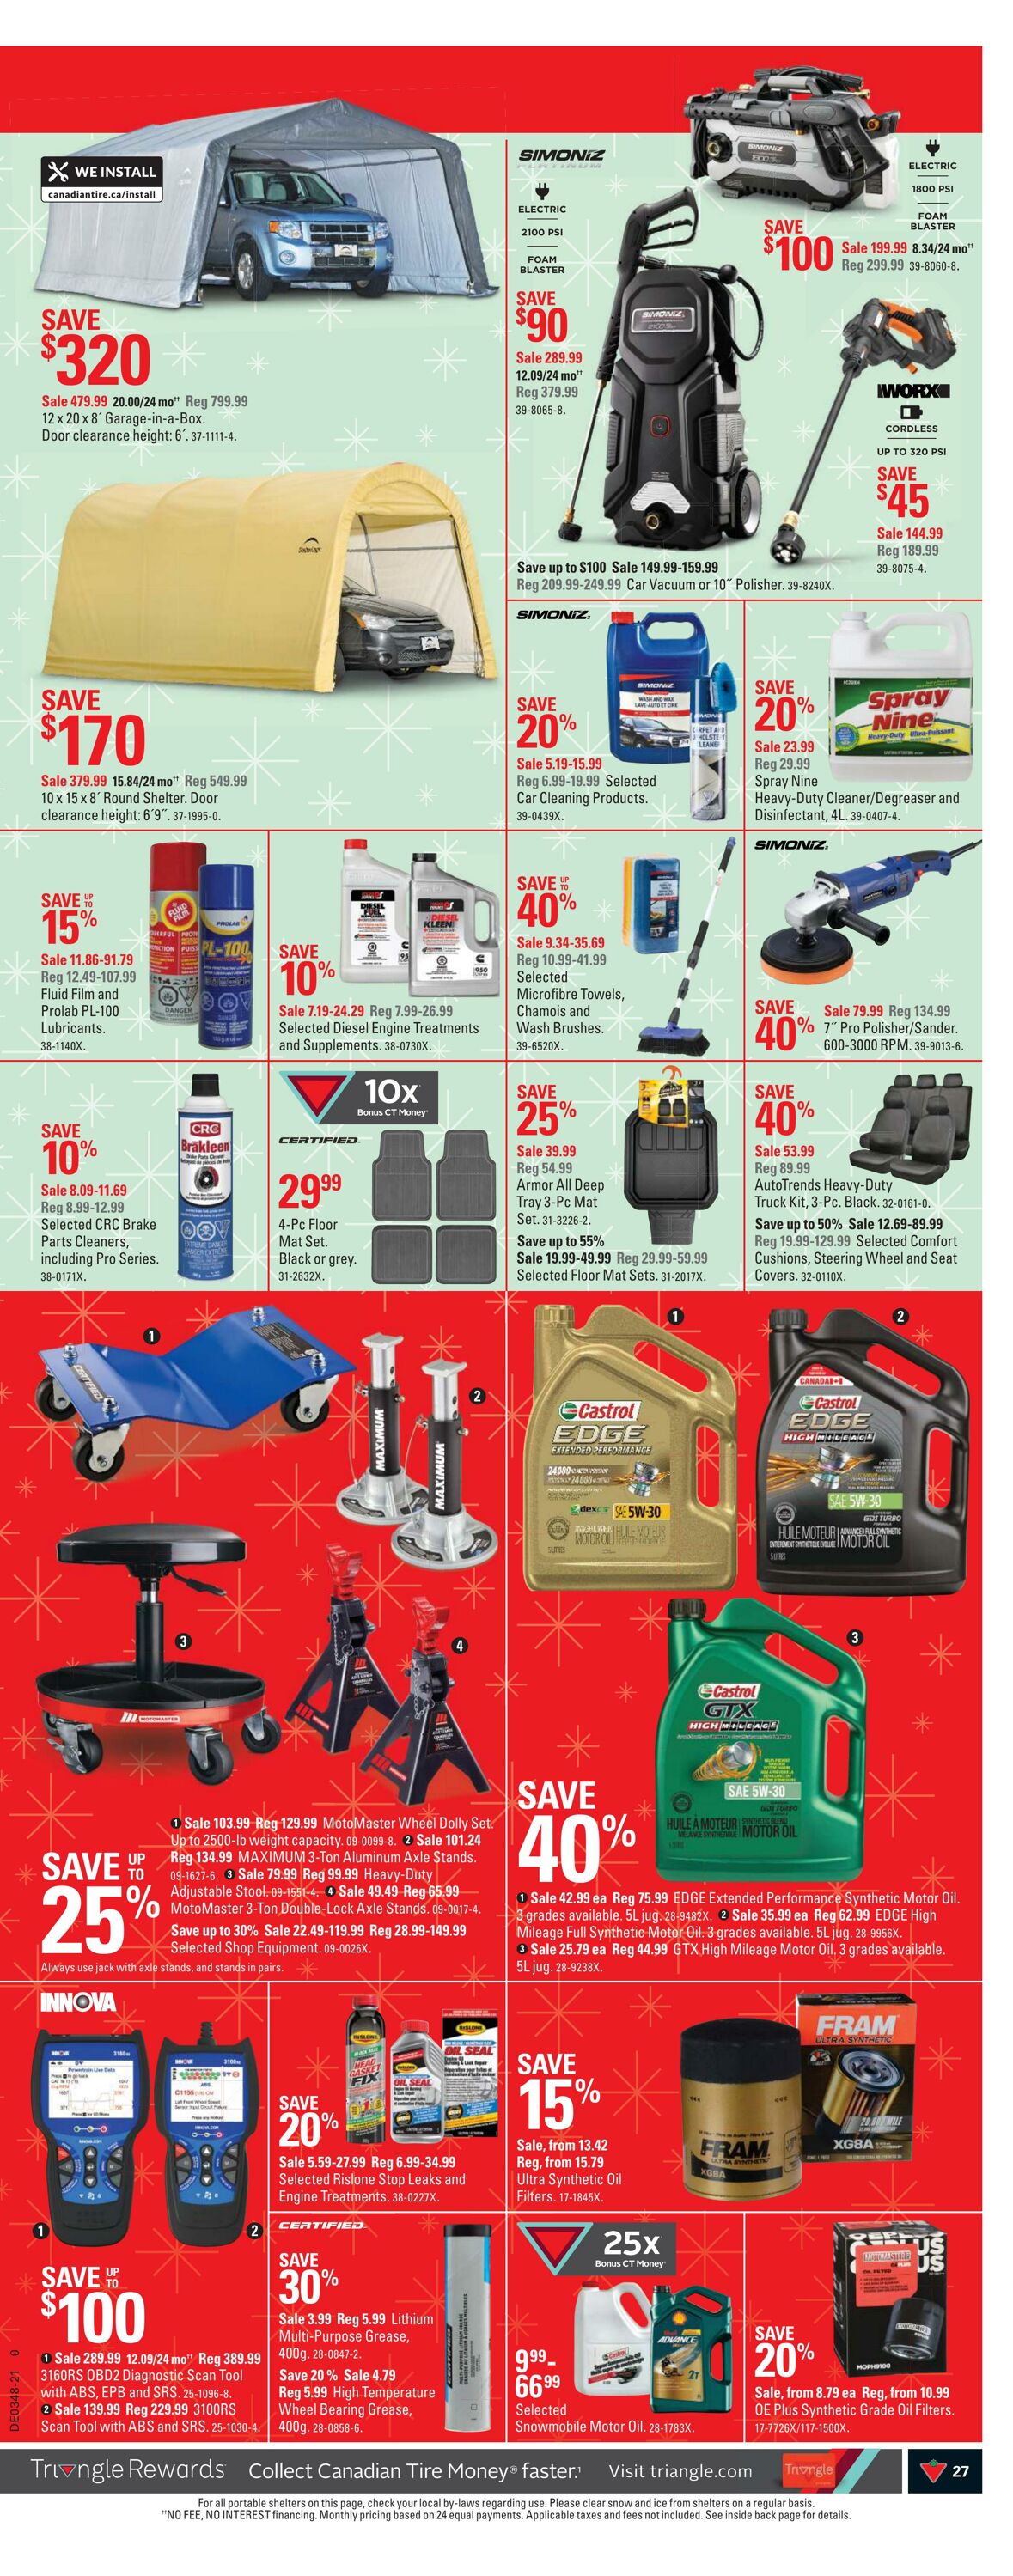 Flyer Canadian Tire 26.11.2021 - 02.12.2021